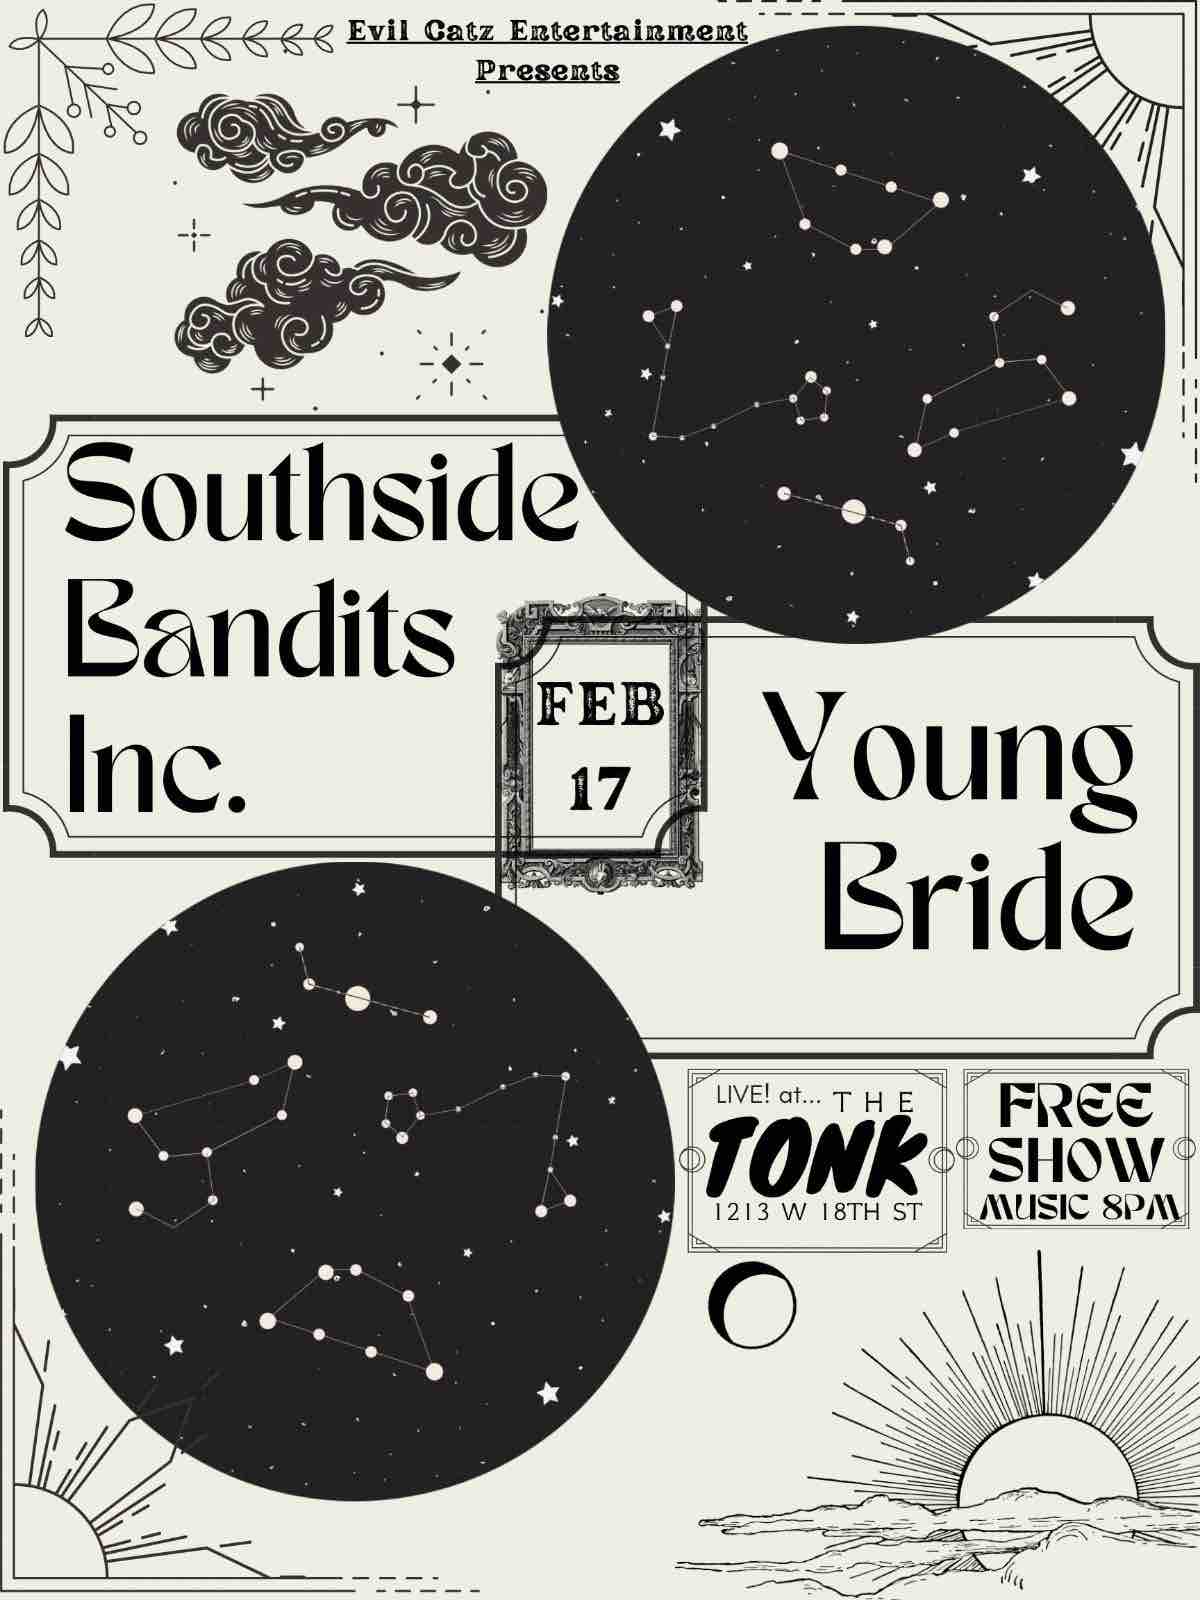 Southside Bandits Inc. and Young Bride  artist poster